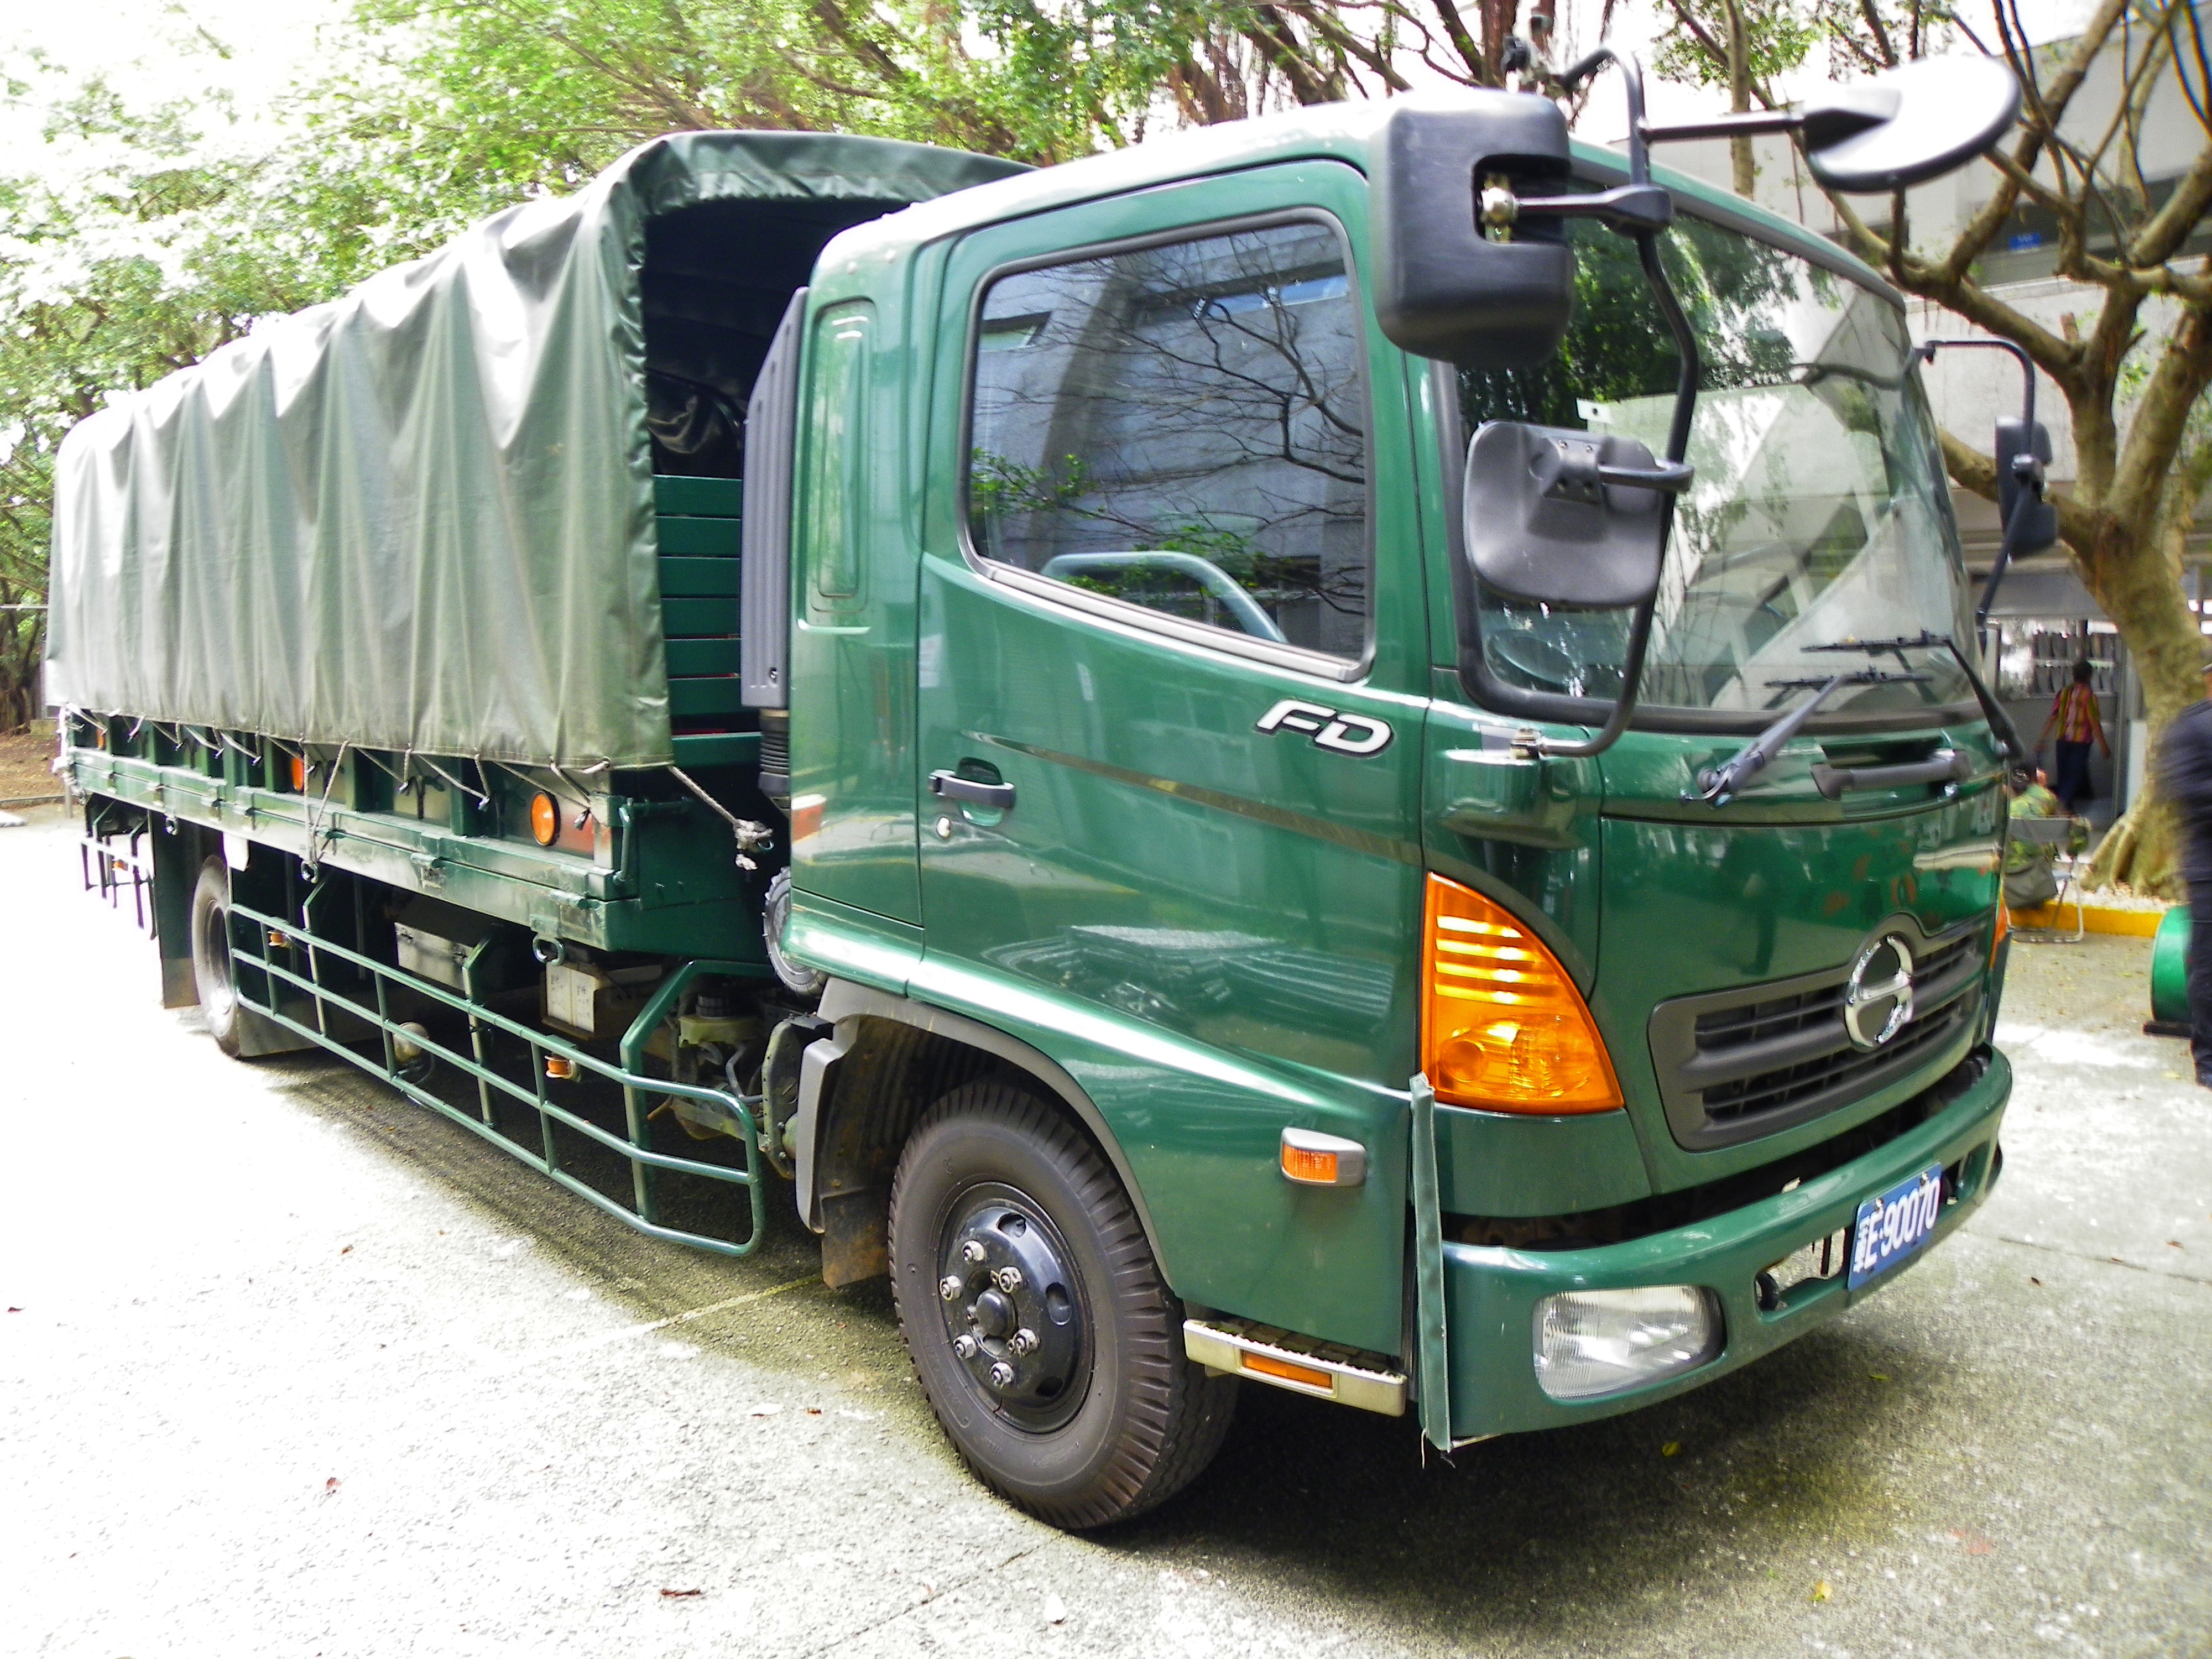 Hino Ranger Backgrounds, Compatible - PC, Mobile, Gadgets| 4000x3000 px